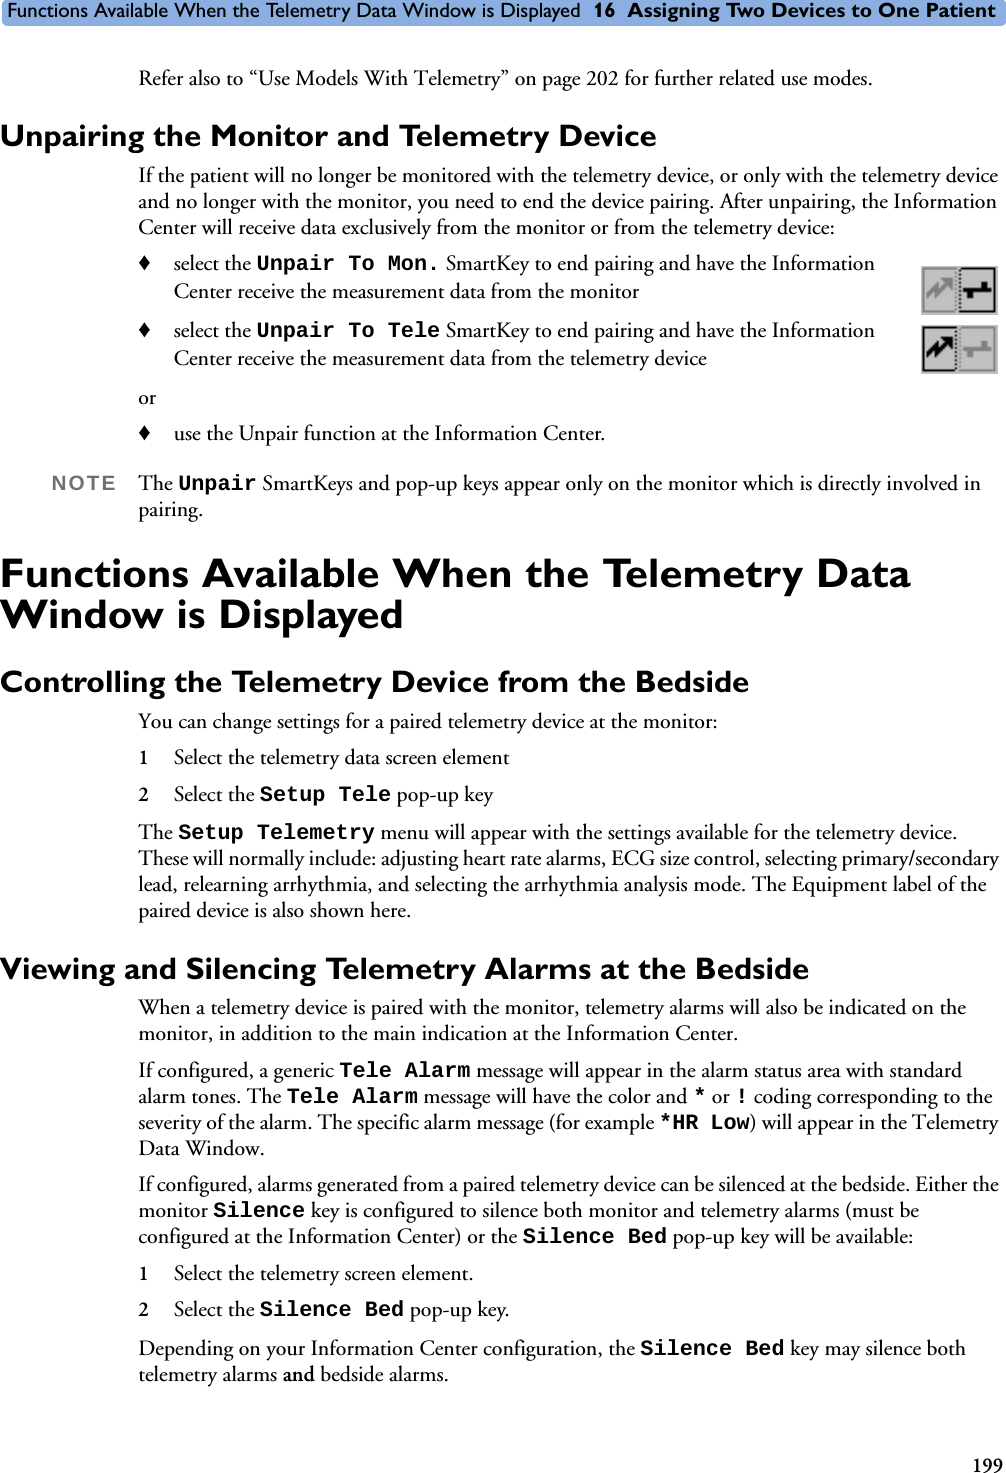 Functions Available When the Telemetry Data Window is Displayed 16 Assigning Two Devices to One Patient199Refer also to “Use Models With Telemetry” on page 202 for further related use modes.Unpairing the Monitor and Telemetry DeviceIf the patient will no longer be monitored with the telemetry device, or only with the telemetry device and no longer with the monitor, you need to end the device pairing. After unpairing, the Information Center will receive data exclusively from the monitor or from the telemetry device:♦select the Unpair To Mon. SmartKey to end pairing and have the Information Center receive the measurement data from the monitor ♦select the Unpair To Tele SmartKey to end pairing and have the Information Center receive the measurement data from the telemetry deviceor ♦use the Unpair function at the Information Center.NOTE The Unpair SmartKeys and pop-up keys appear only on the monitor which is directly involved in pairing.Functions Available When the Telemetry Data Window is DisplayedControlling the Telemetry Device from the BedsideYou can change settings for a paired telemetry device at the monitor:1Select the telemetry data screen element 2Select the Setup Tele pop-up key The Setup Telemetry menu will appear with the settings available for the telemetry device. These will normally include: adjusting heart rate alarms, ECG size control, selecting primary/secondary lead, relearning arrhythmia, and selecting the arrhythmia analysis mode. The Equipment label of the paired device is also shown here. Viewing and Silencing Telemetry Alarms at the BedsideWhen a telemetry device is paired with the monitor, telemetry alarms will also be indicated on the monitor, in addition to the main indication at the Information Center. If configured, a generic Tele Alarm message will appear in the alarm status area with standard alarm tones. The Tele Alarm message will have the color and * or !coding corresponding to the severity of the alarm. The specific alarm message (for example *HR Low) will appear in the Telemetry Data Window. If configured, alarms generated from a paired telemetry device can be silenced at the bedside. Either the monitor Silence key is configured to silence both monitor and telemetry alarms (must be configured at the Information Center) or the Silence Bed pop-up key will be available:1Select the telemetry screen element. 2Select the Silence Bed pop-up key.Depending on your Information Center configuration, the Silence Bed key may silence both telemetry alarms and bedside alarms.